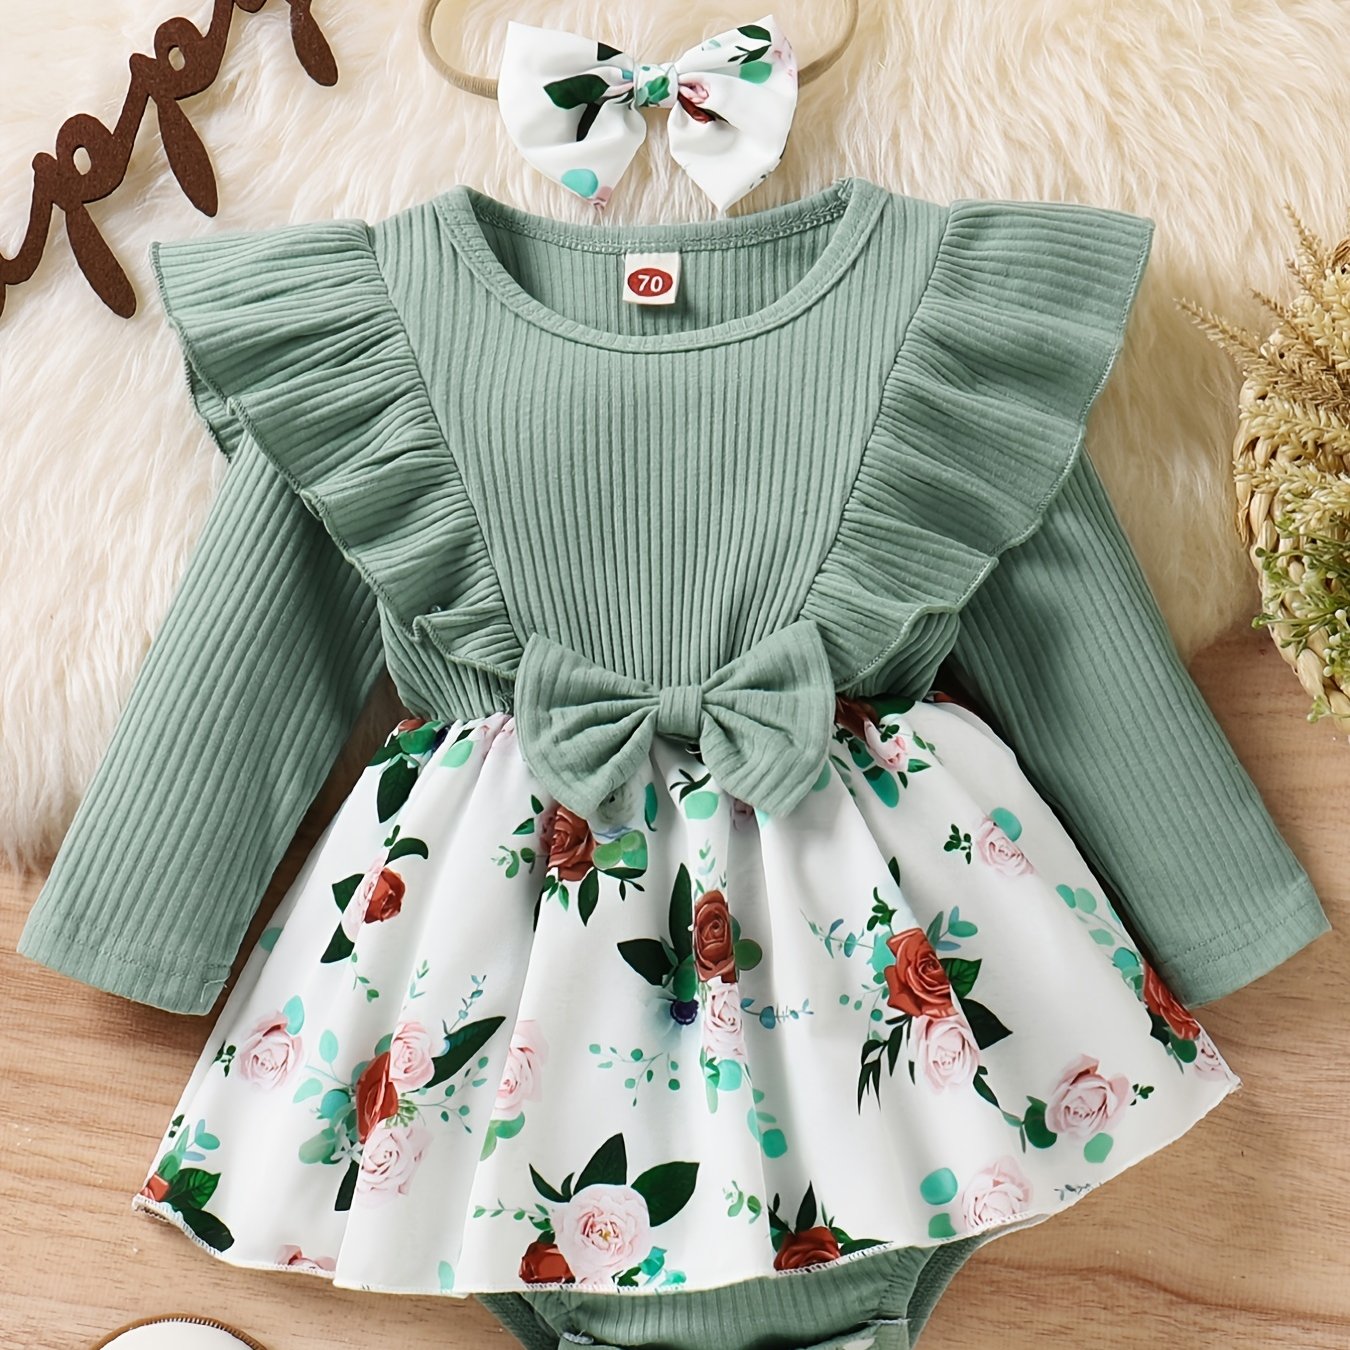 Newborn Infant Baby Girls Plaid Floral Dress Outfit